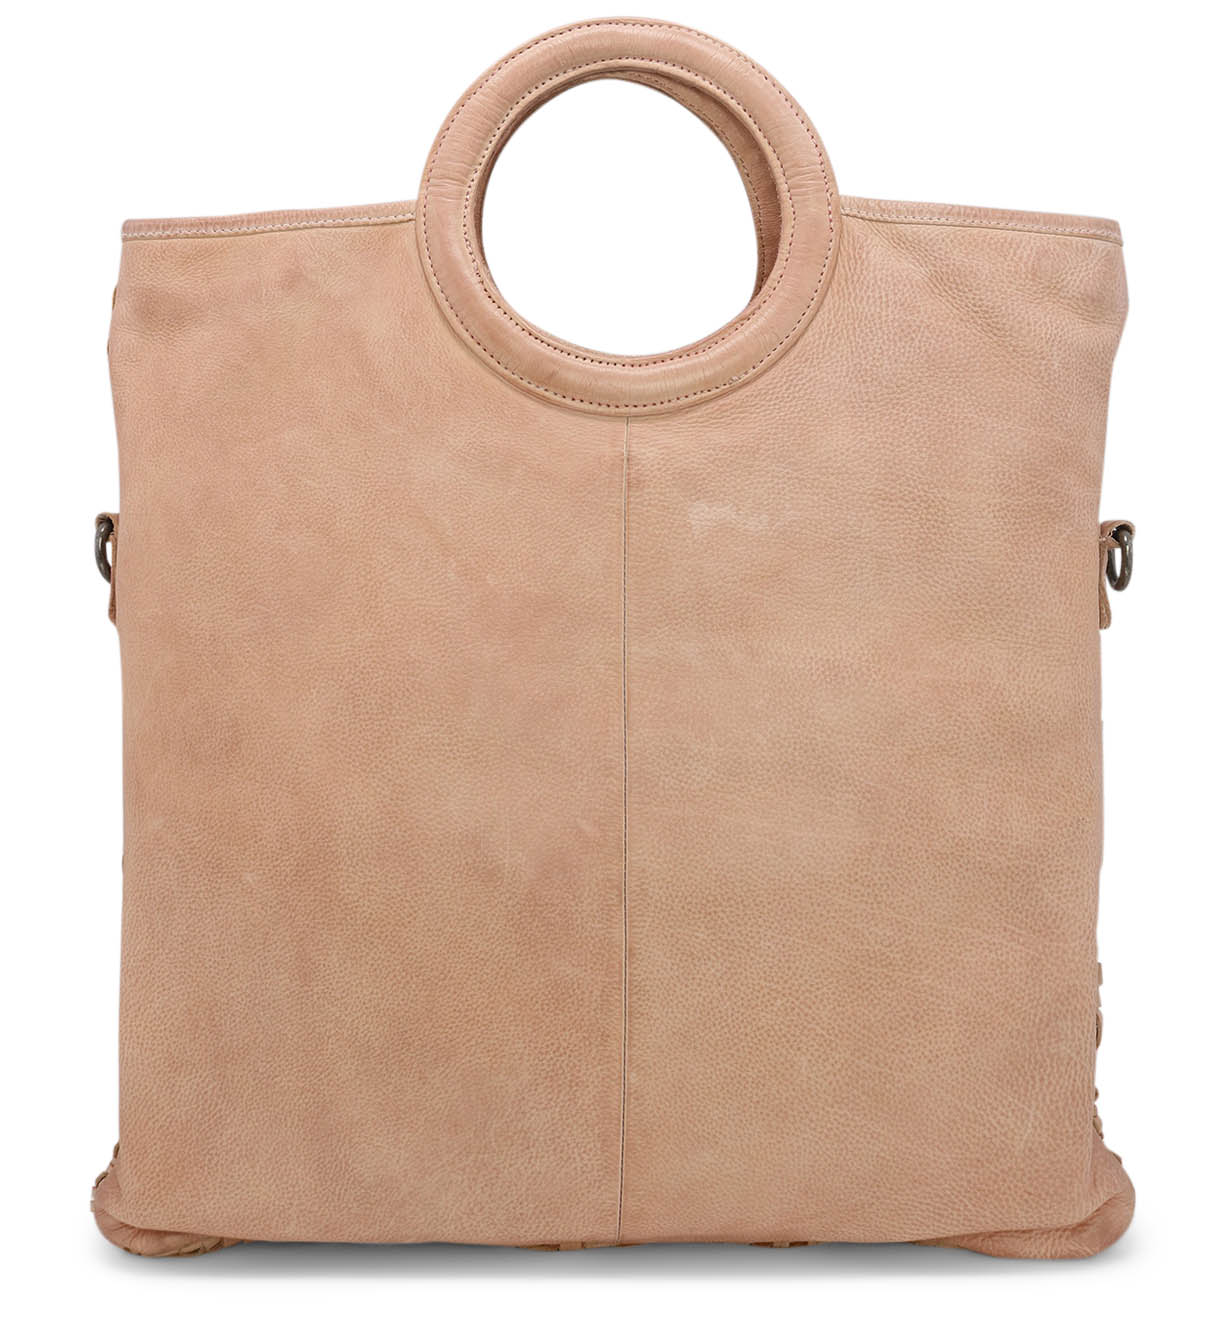 An Adele tote bag by Bed Stu, made of beige leather and featuring a round handle.